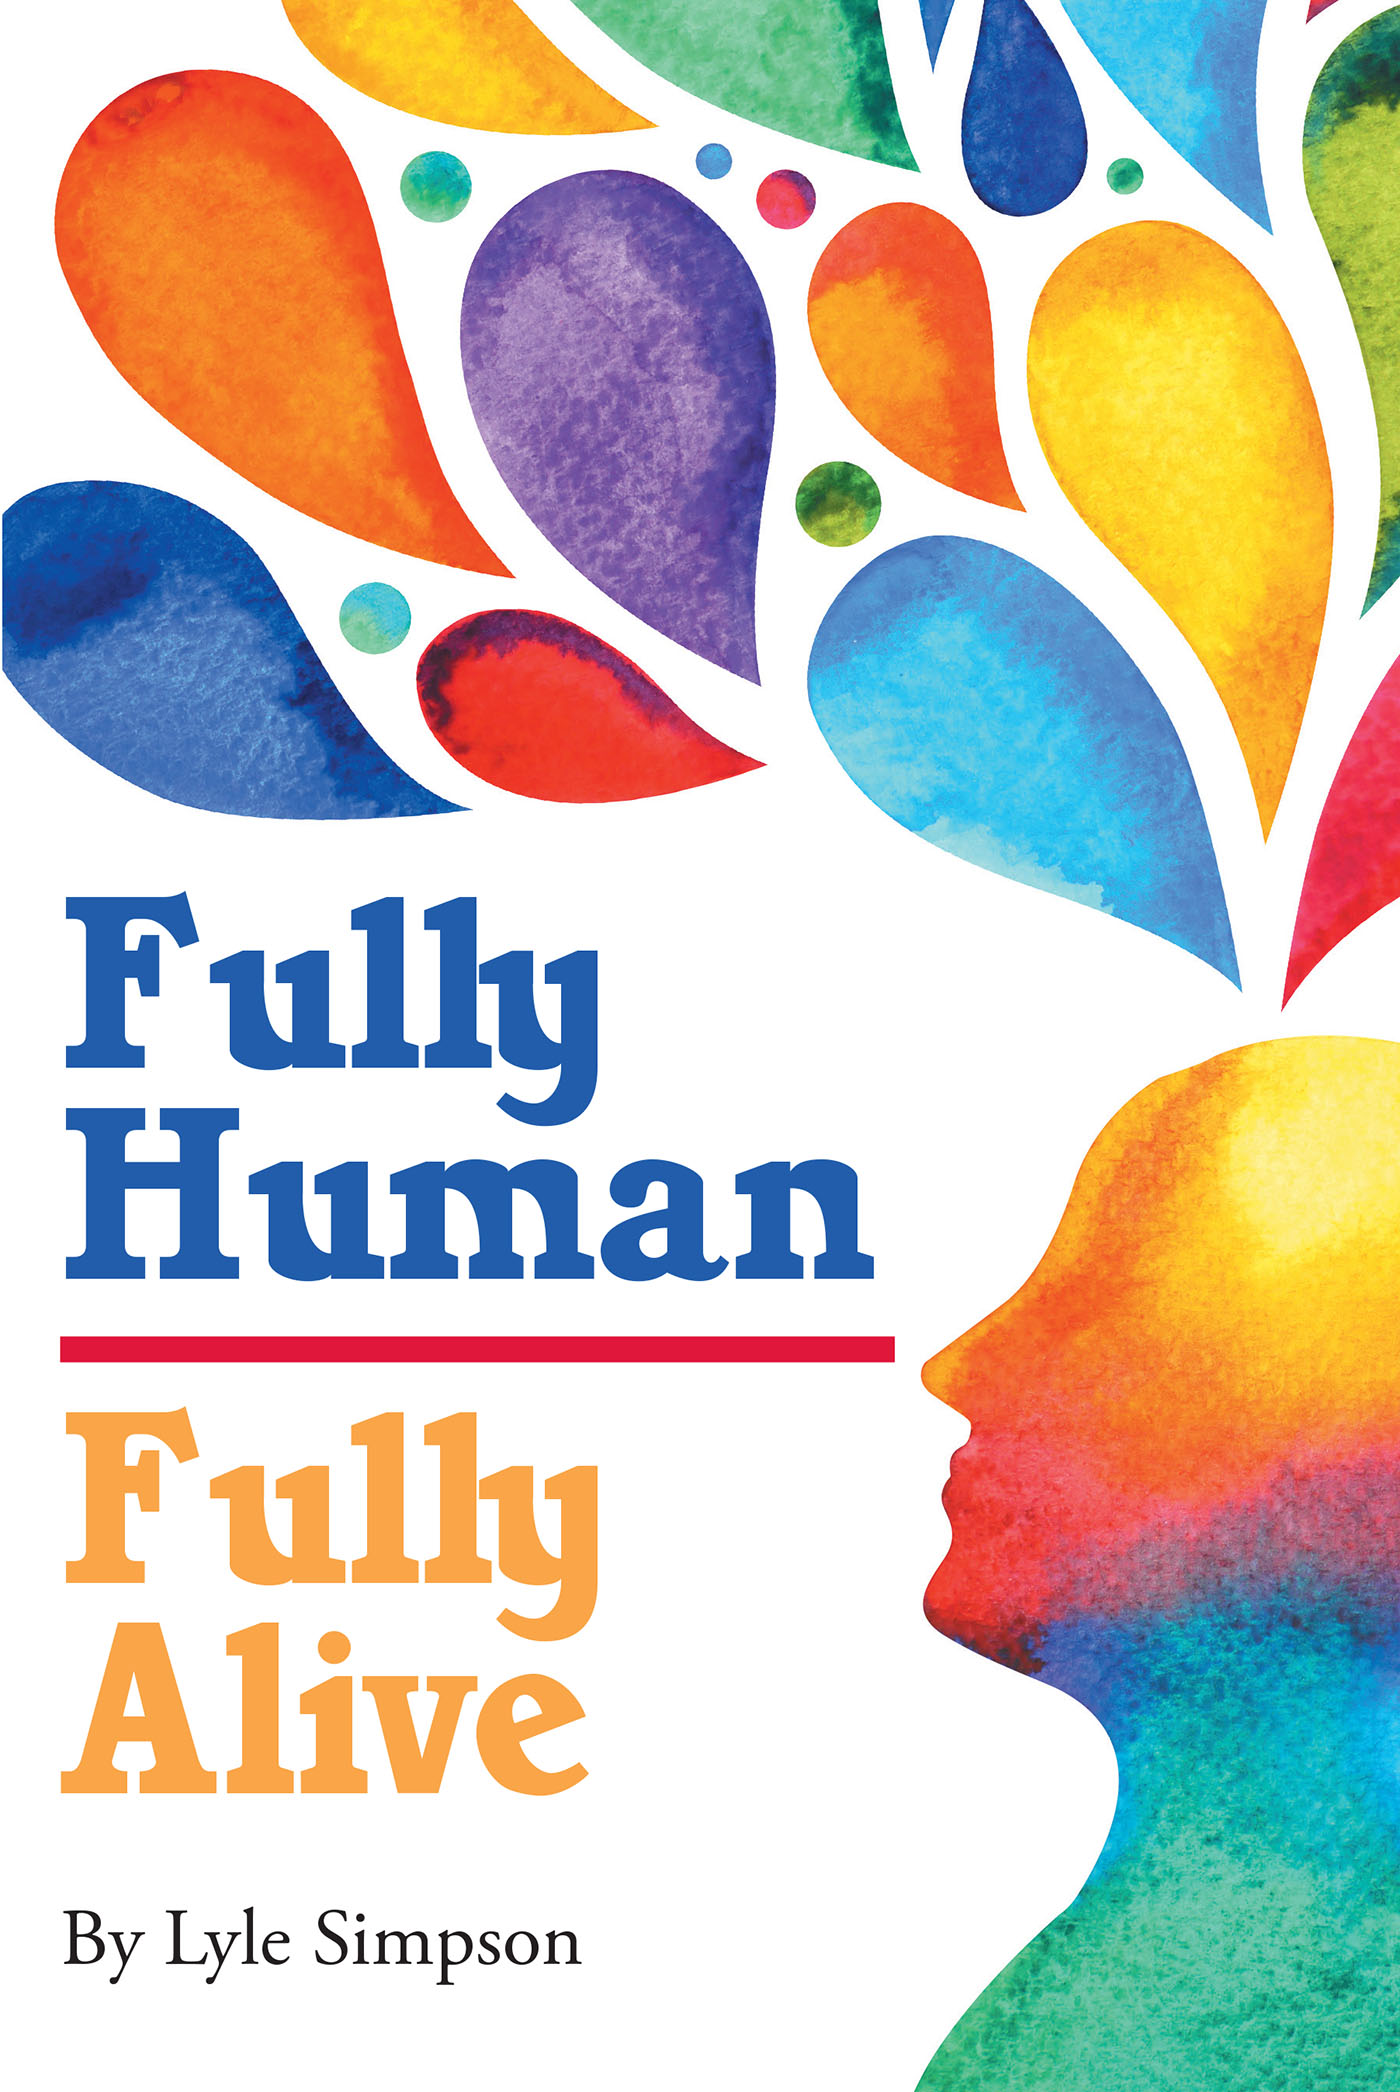 Lyle Simpson’s New Book, "Fully Human: Fully Alive," is a Captivating and Intriguing Book Written to Help Americans Live the Fullest Life Possible